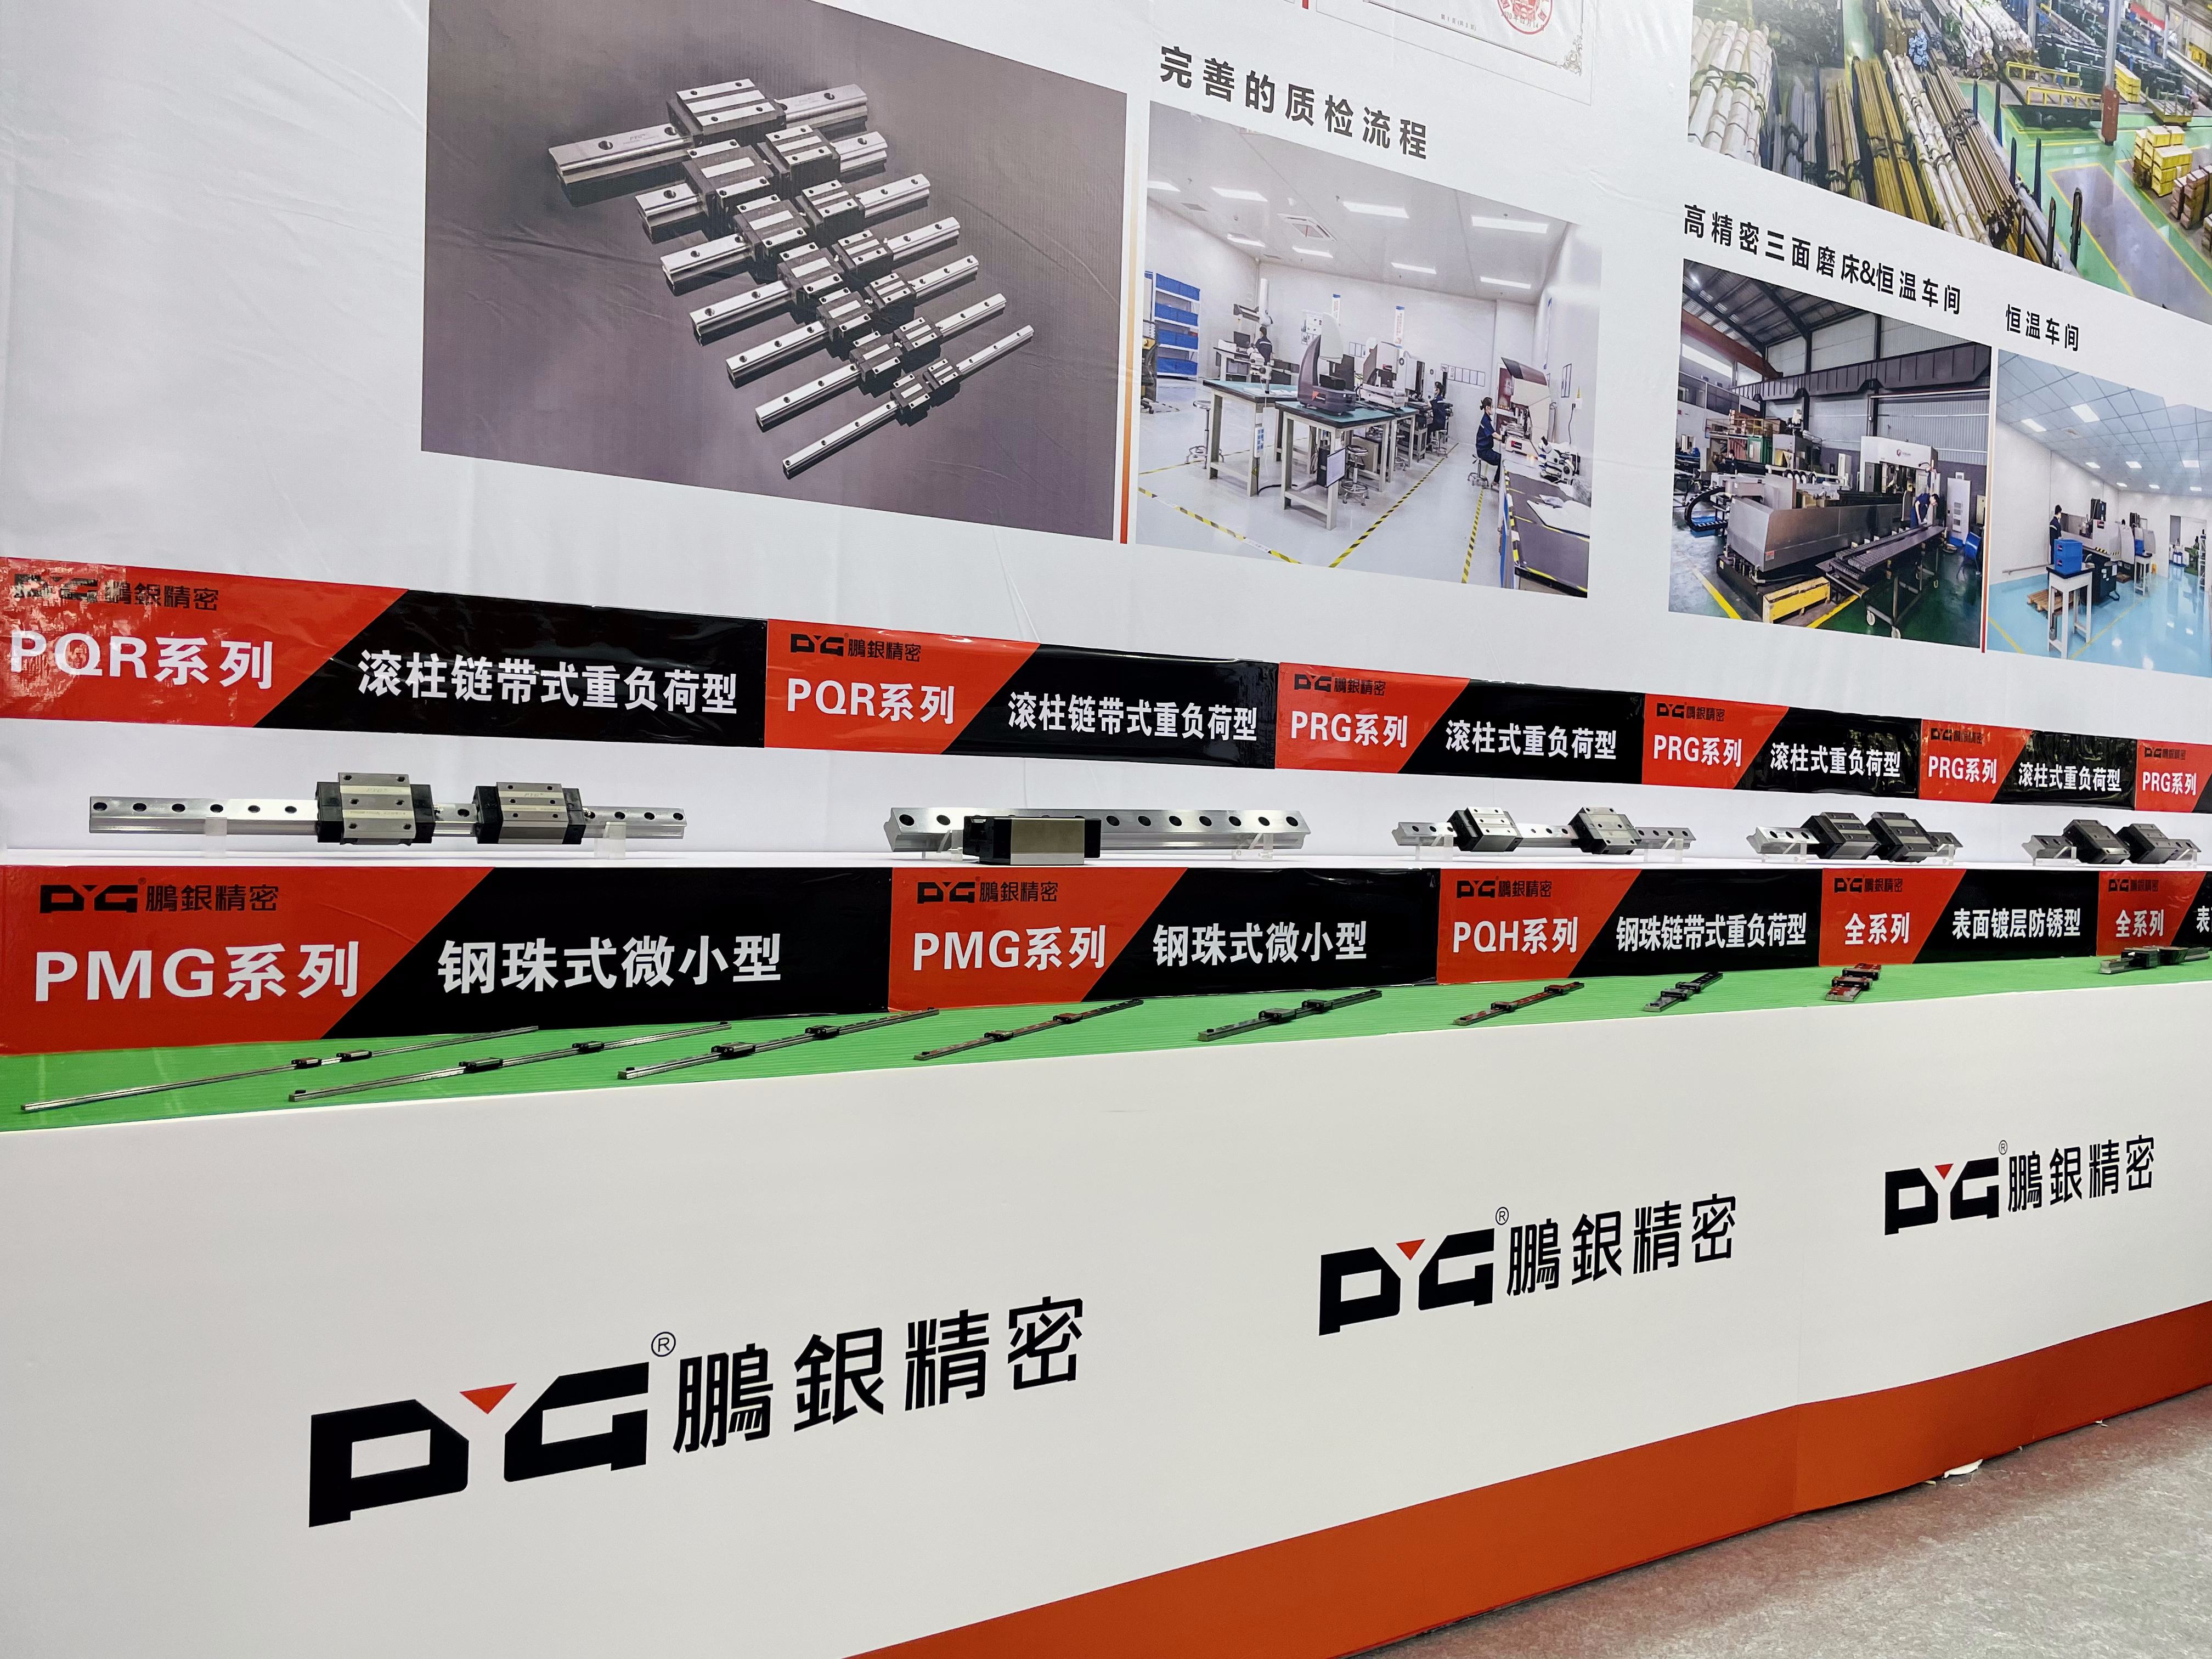 Pengyin Precision Appears at Yuhuan International Machine Tool Exhibition, Receiving Over 100 Customers